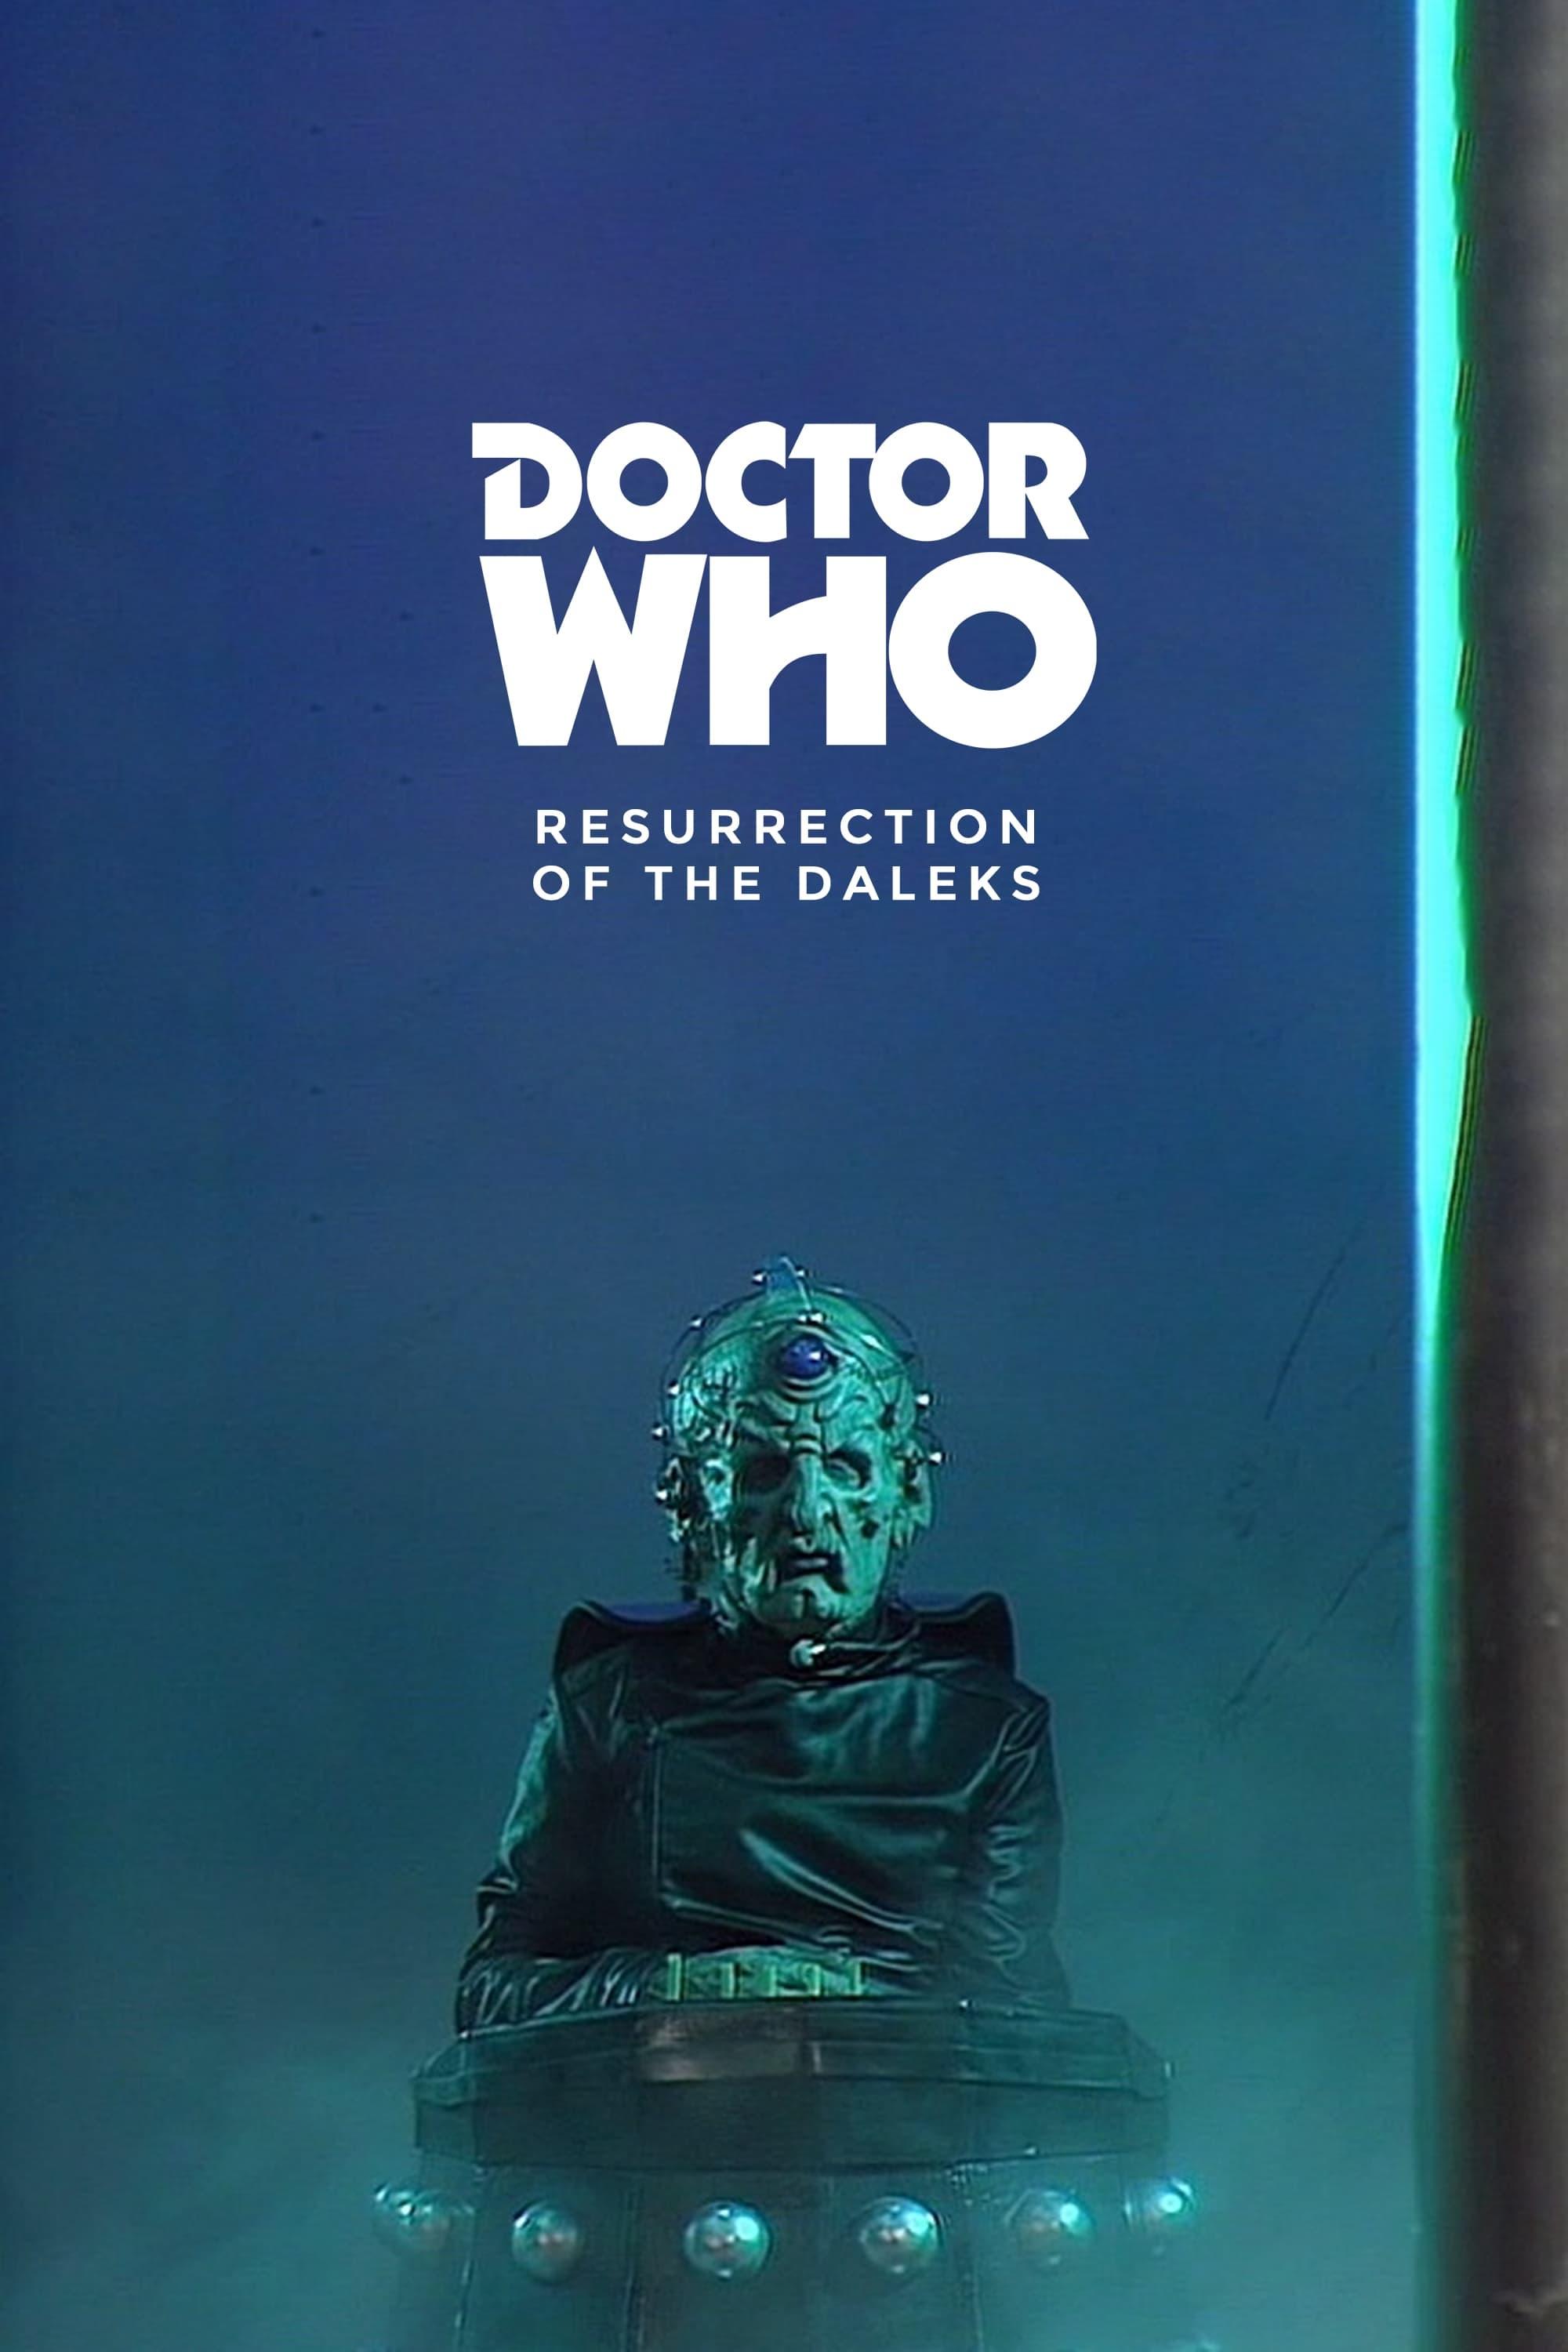 Doctor Who: Resurrection of the Daleks poster